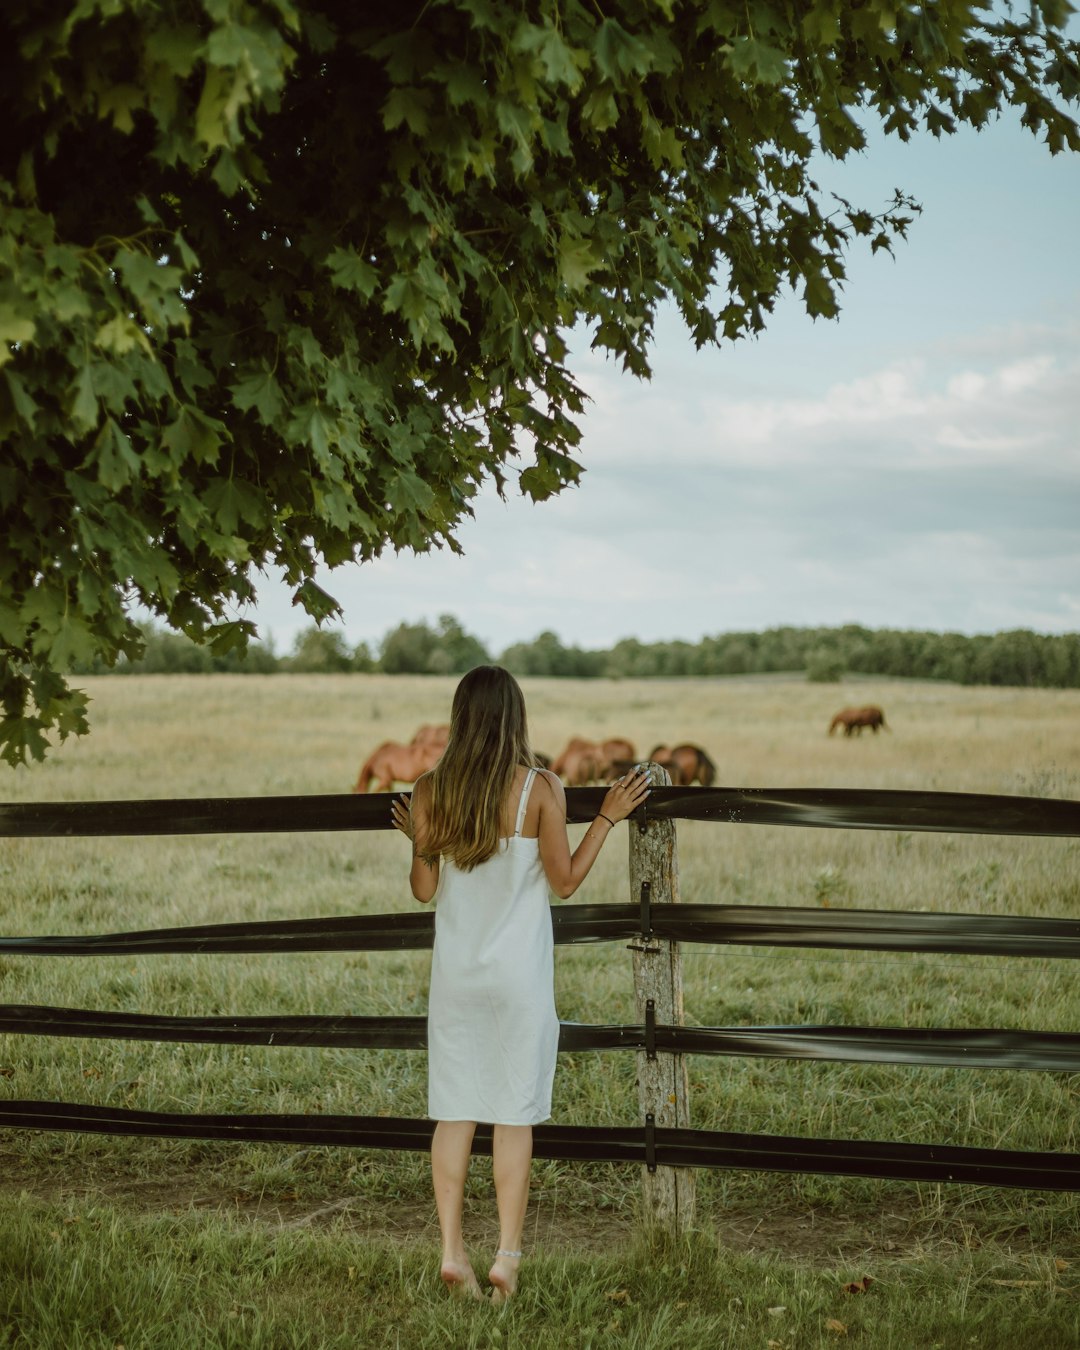 woman in white dress standing beside brown wooden fence during daytime